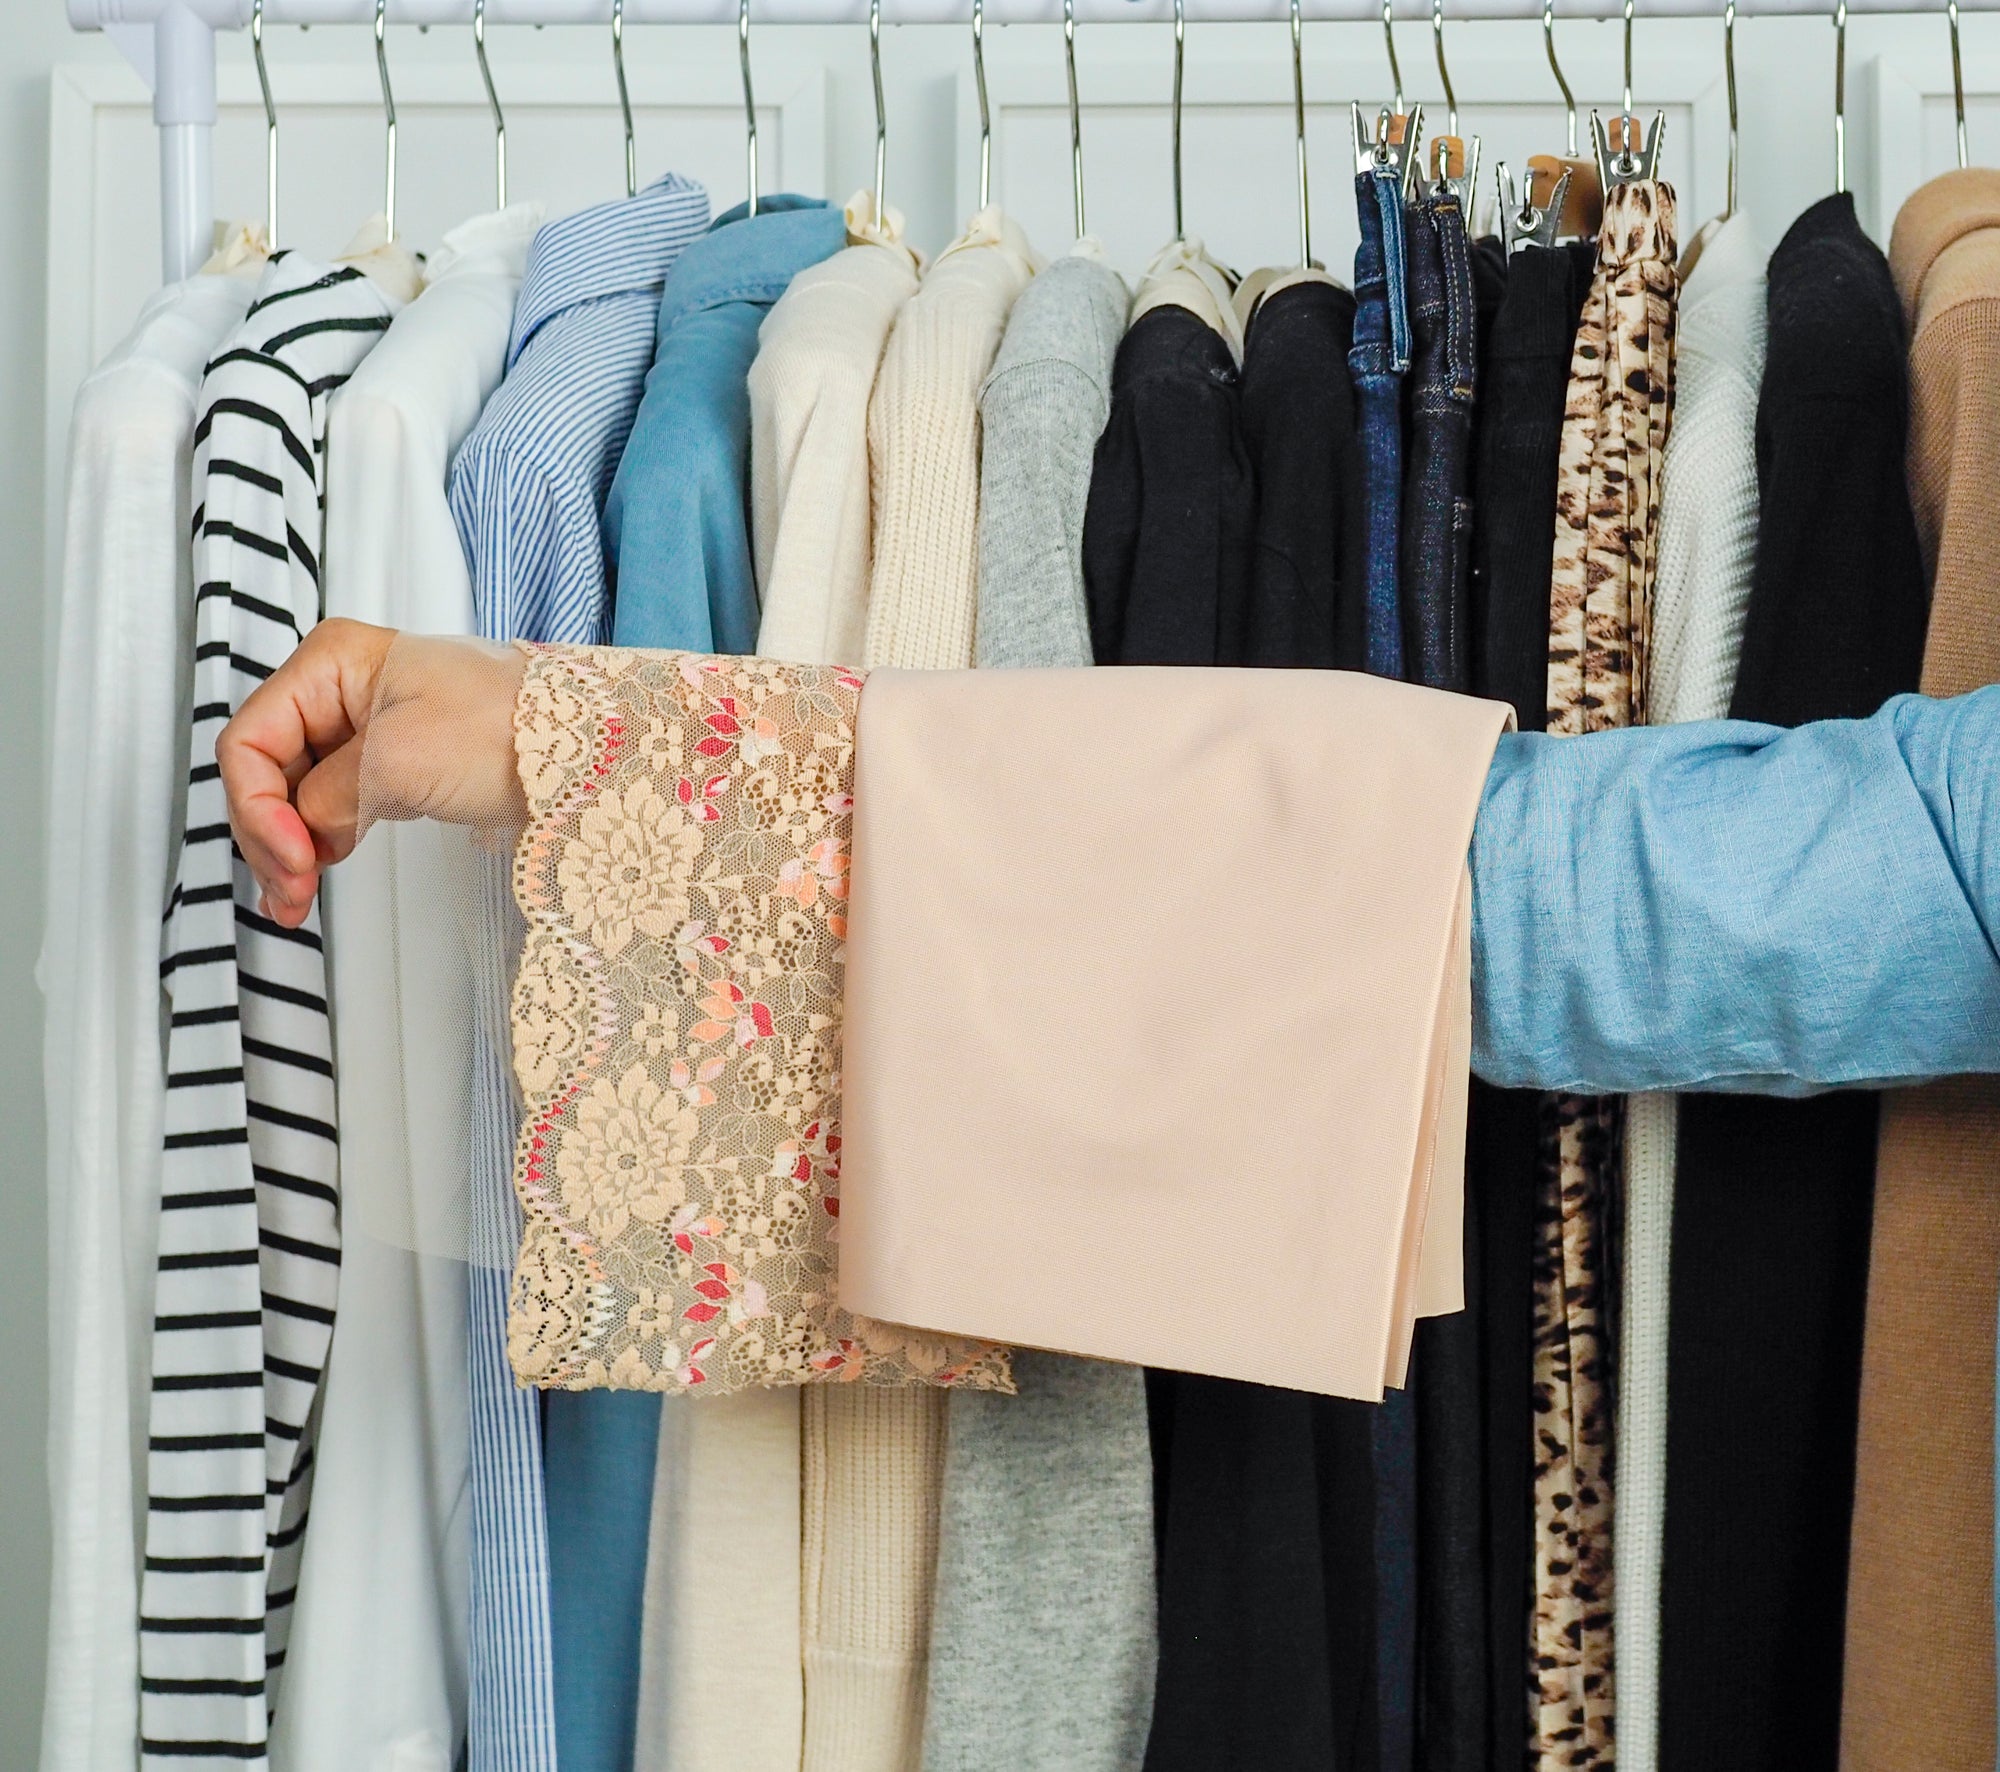 This New  Section Is Filled With Capsule Wardrobe Clothes and  Accessories